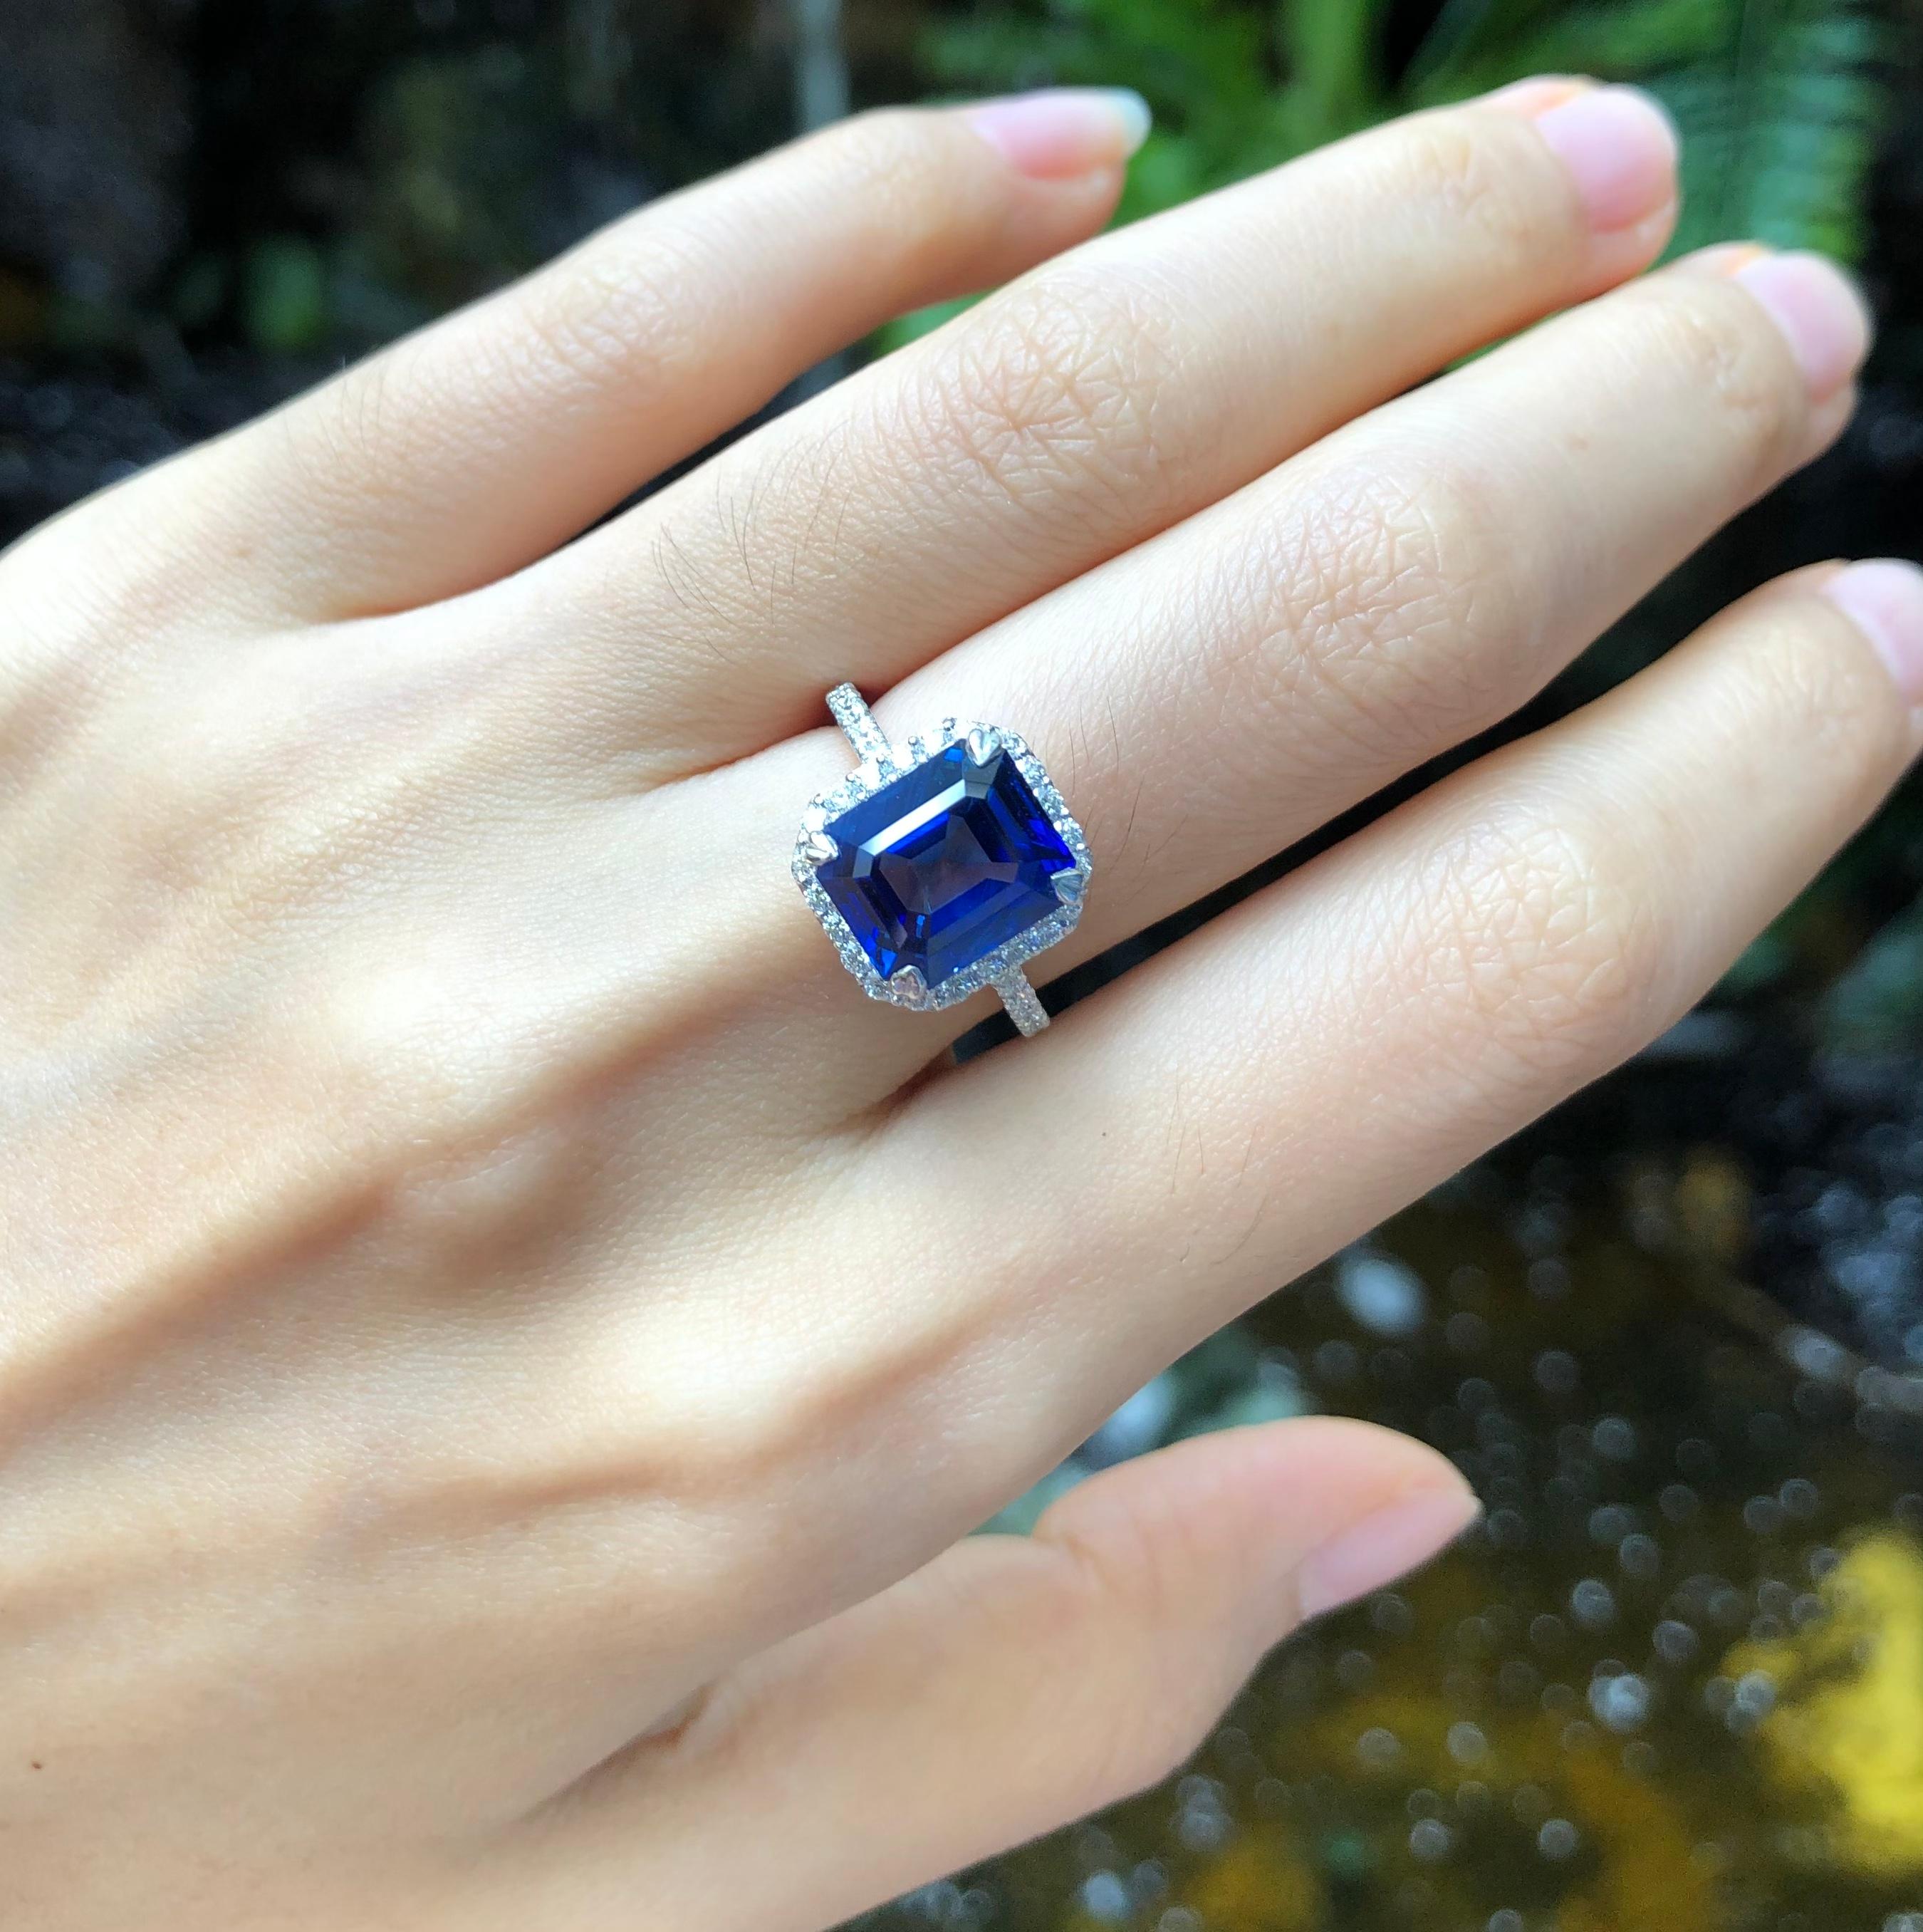 Ceylon Blue Sapphire 5.38 carats with Diamond 0.57 carat Ring set in Platinum 950 Settings
(GRS Certified)

Width:  1.0 cm 
Length:  1.2 cm
Ring Size: 50
Total Weight: 7.3 grams

Ceylon Blue Sapphire
Width:  0.9 cm 
Length:  1.0 cm

